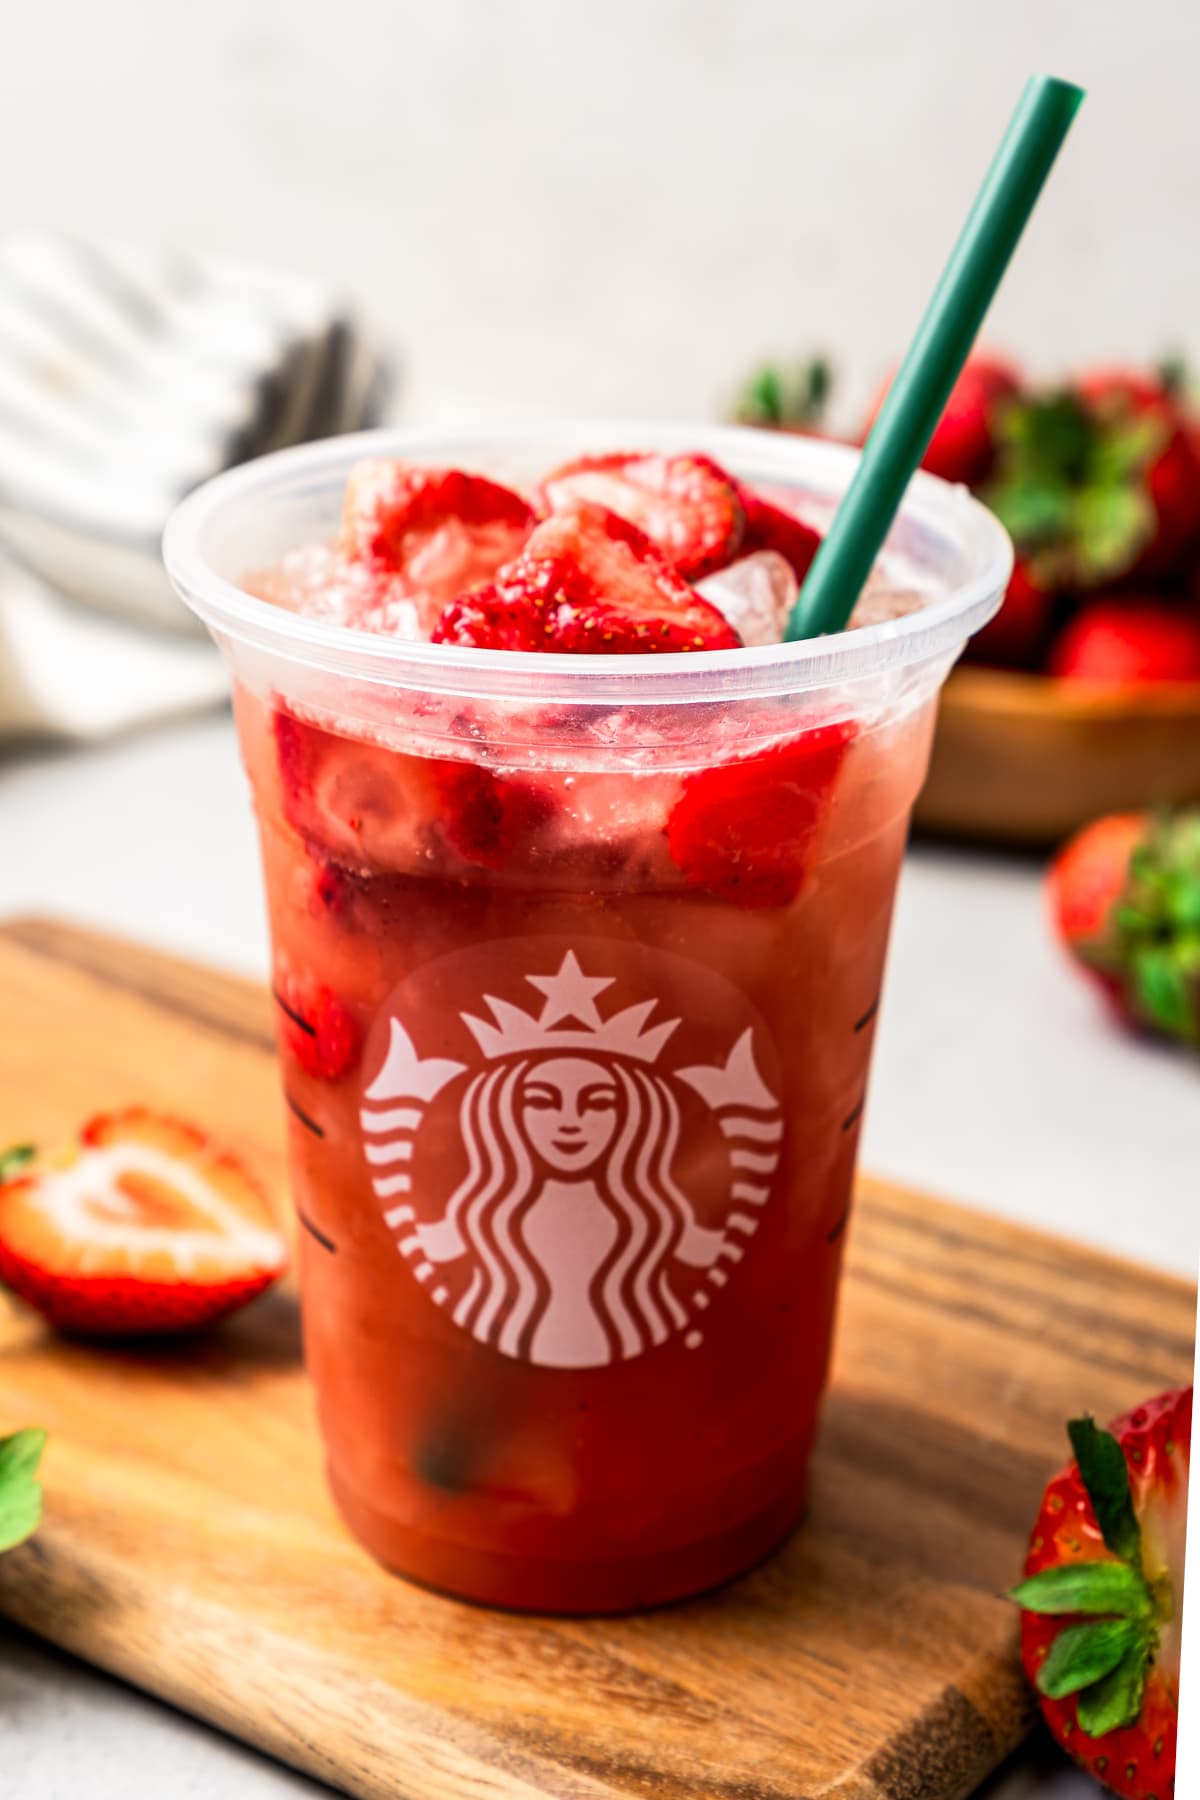 A strawberry acai refresher in a plastic cup garnished with freeze-dried strawberries.